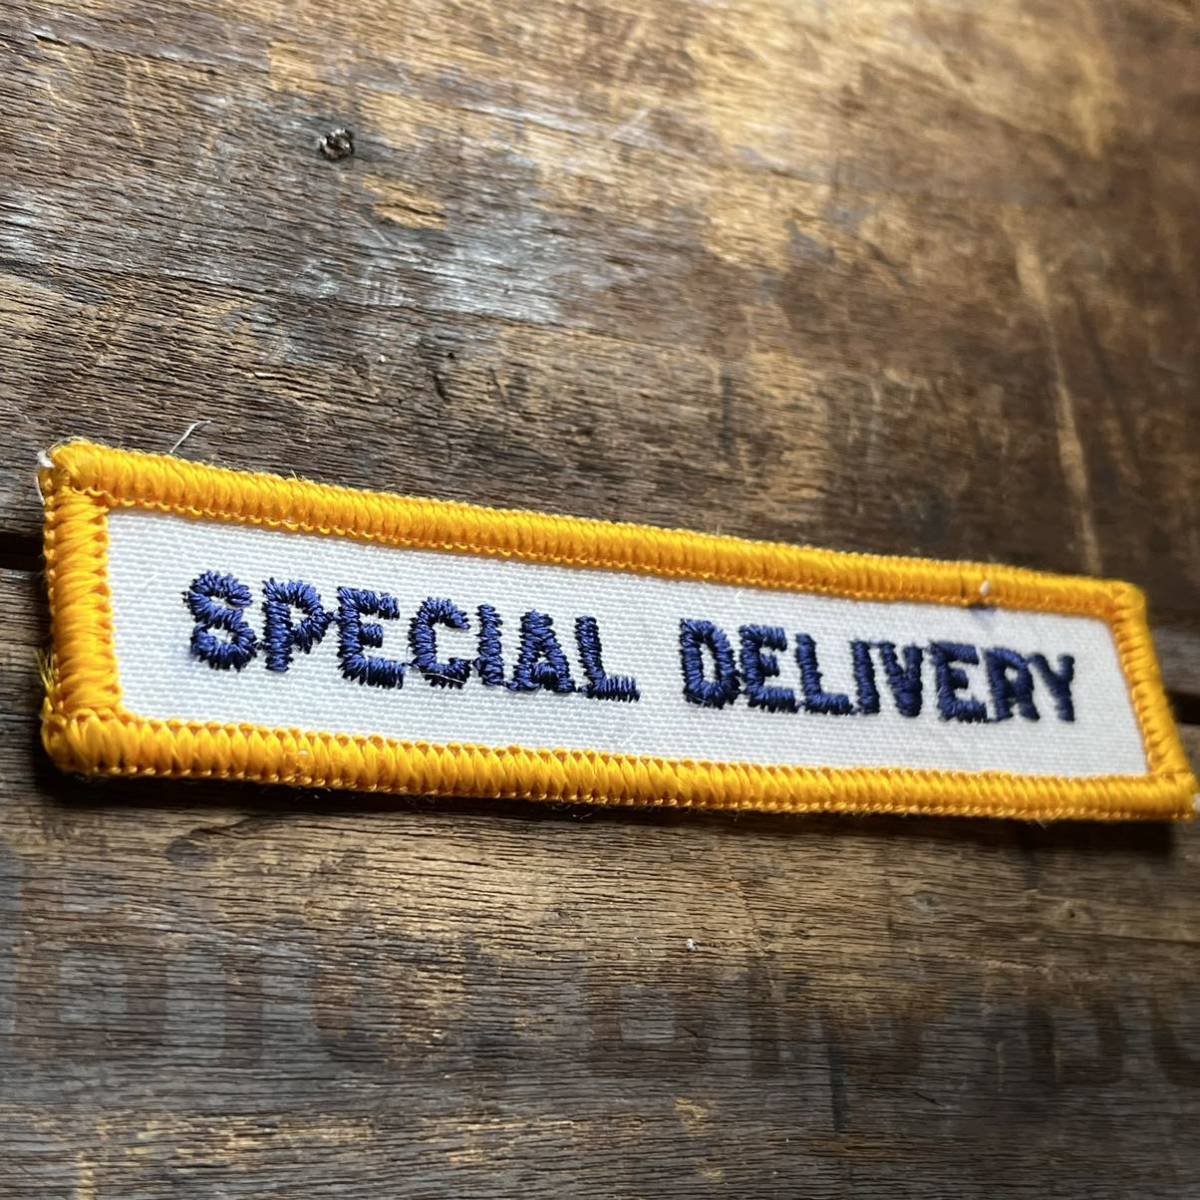 【USA vintage】ワッペン　SPECIAL DELIVERY シンプル　ロゴ　刺繍ワッペン アメリカ　ビンテージ　パッチ